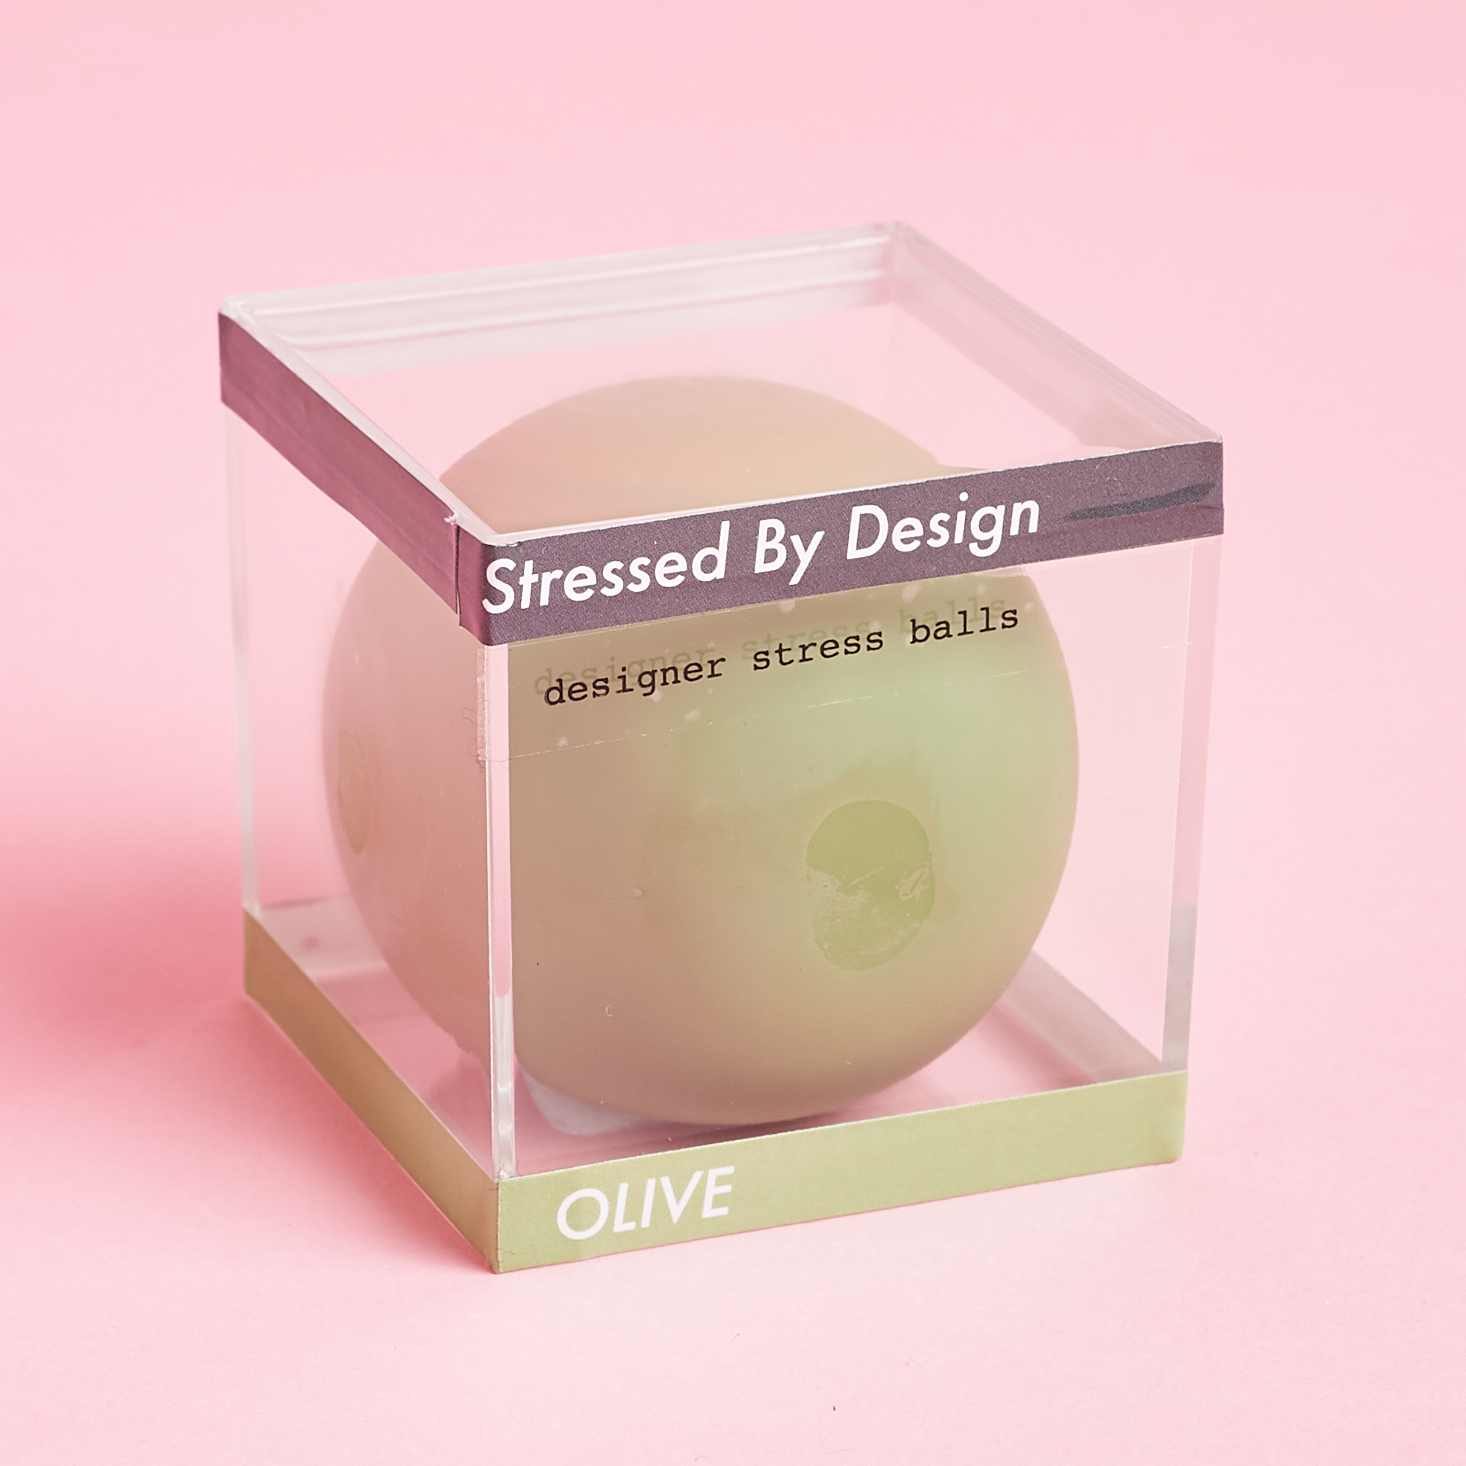 Stressed by Design Stress Ball in acrylic box